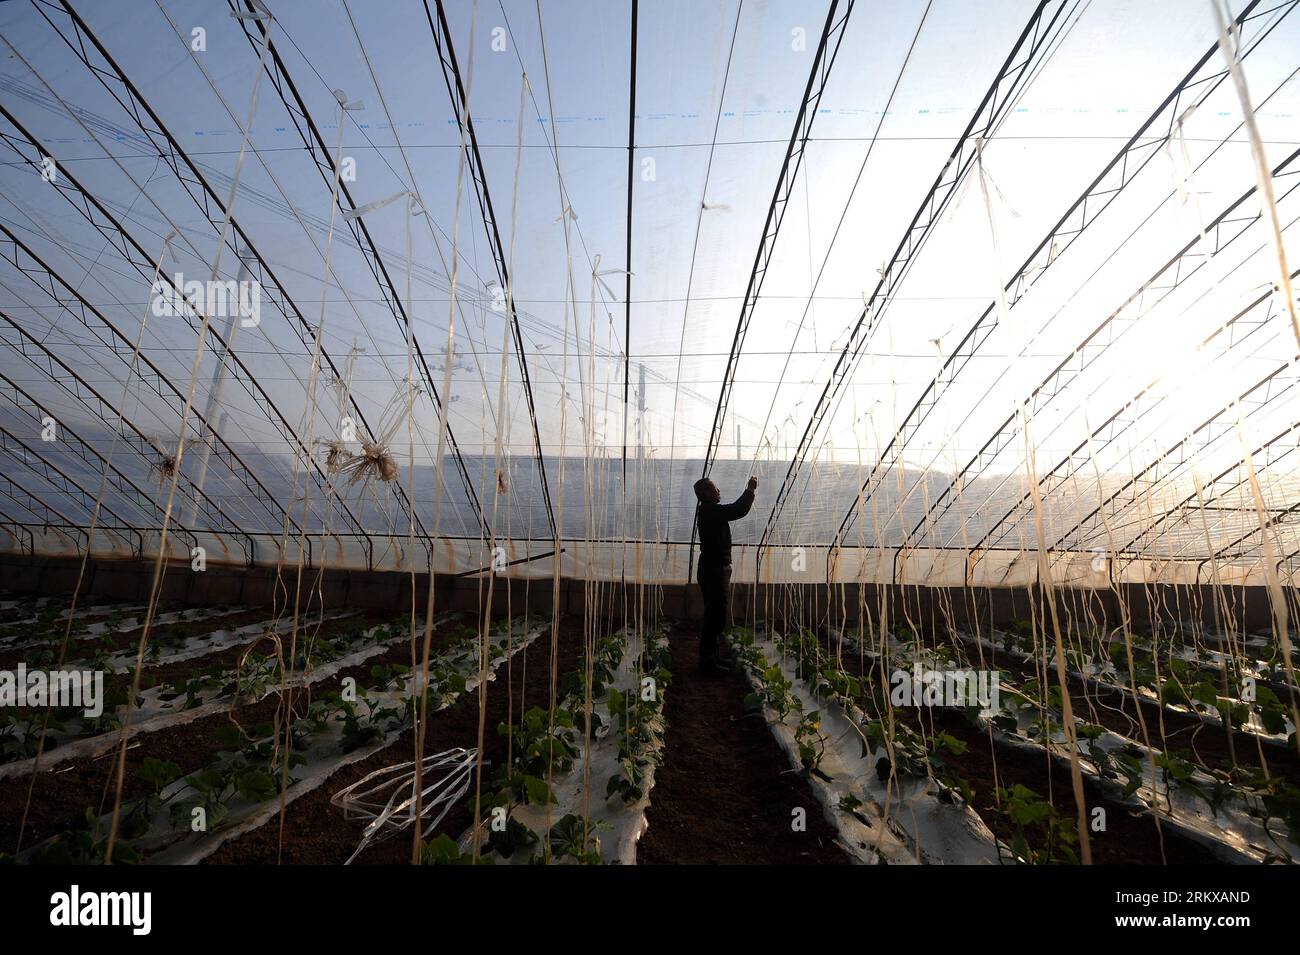 Bildnummer: 58929364  Datum: 11.12.2012  Copyright: imago/Xinhua TAIYUAN, Dec. 11, 2012 - A villager works in a greenhouse in Jingadao Village of Changzhi County, north China s Shanxi Province, Dec. 11, 2012. Jingadao Village of Changzhi County has formed a recycling economy. Villagers here use marsh gas as fuel after fermenting pig excrement, adopt clean sewage disposal system, produce natural fertilizer with animal excrement and plant green vegetables. (Xinhua/Yan Yan) (lfj) SHANXI-CHANGZHI-ENVIRONMENTAL FRIENDLY VILLAGE (CN) PUBLICATIONxNOTxINxCHN Wirtschaft Landwirtschaft Gewächshaus Gemüs Stock Photo